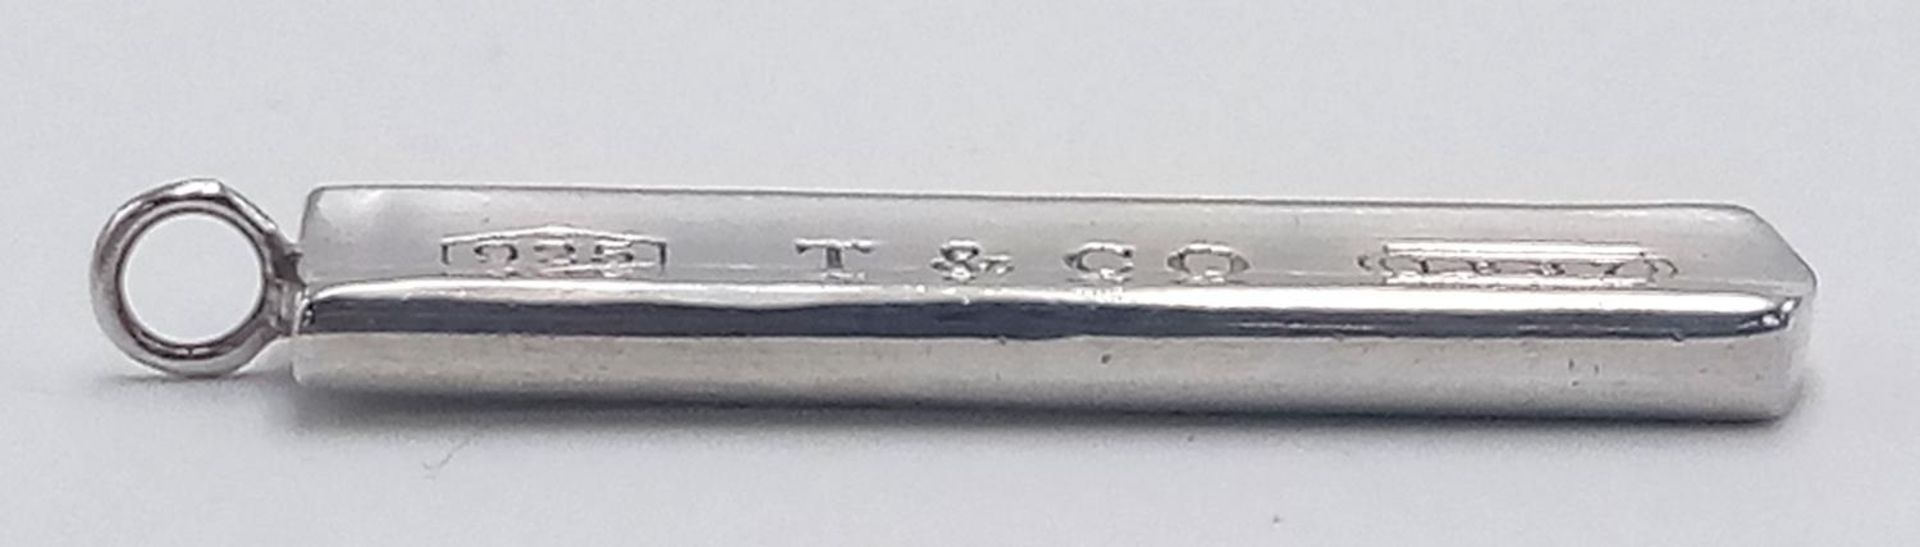 A TIFFANY & CO STERLING SILVER PENDANT 7.5G , 39mm x 8mm. SC 9093 - Image 3 of 4